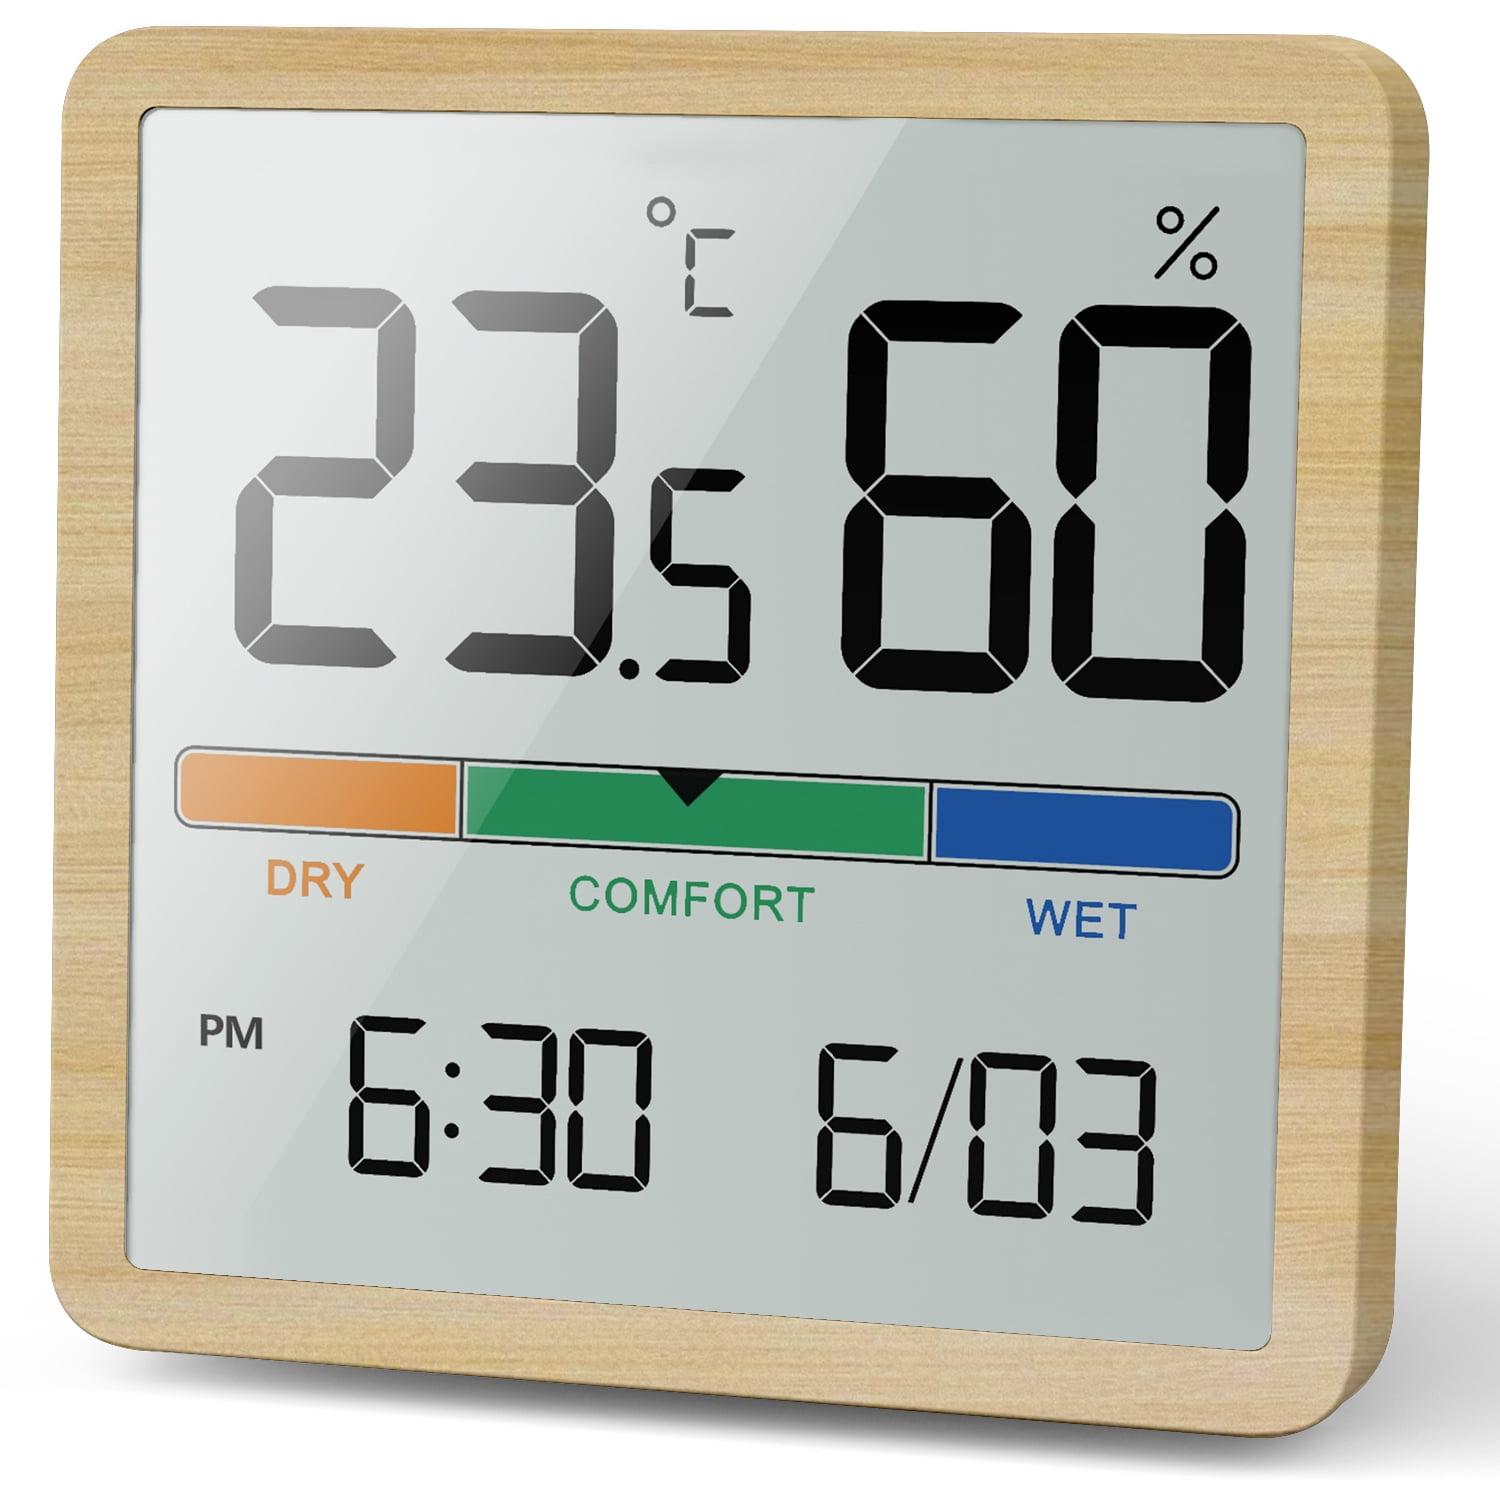 Yuehao Timers Wall Mount Analog Humidity Gauge Hygrometer Temperature Meter Thermometer Indoor Home Appliances